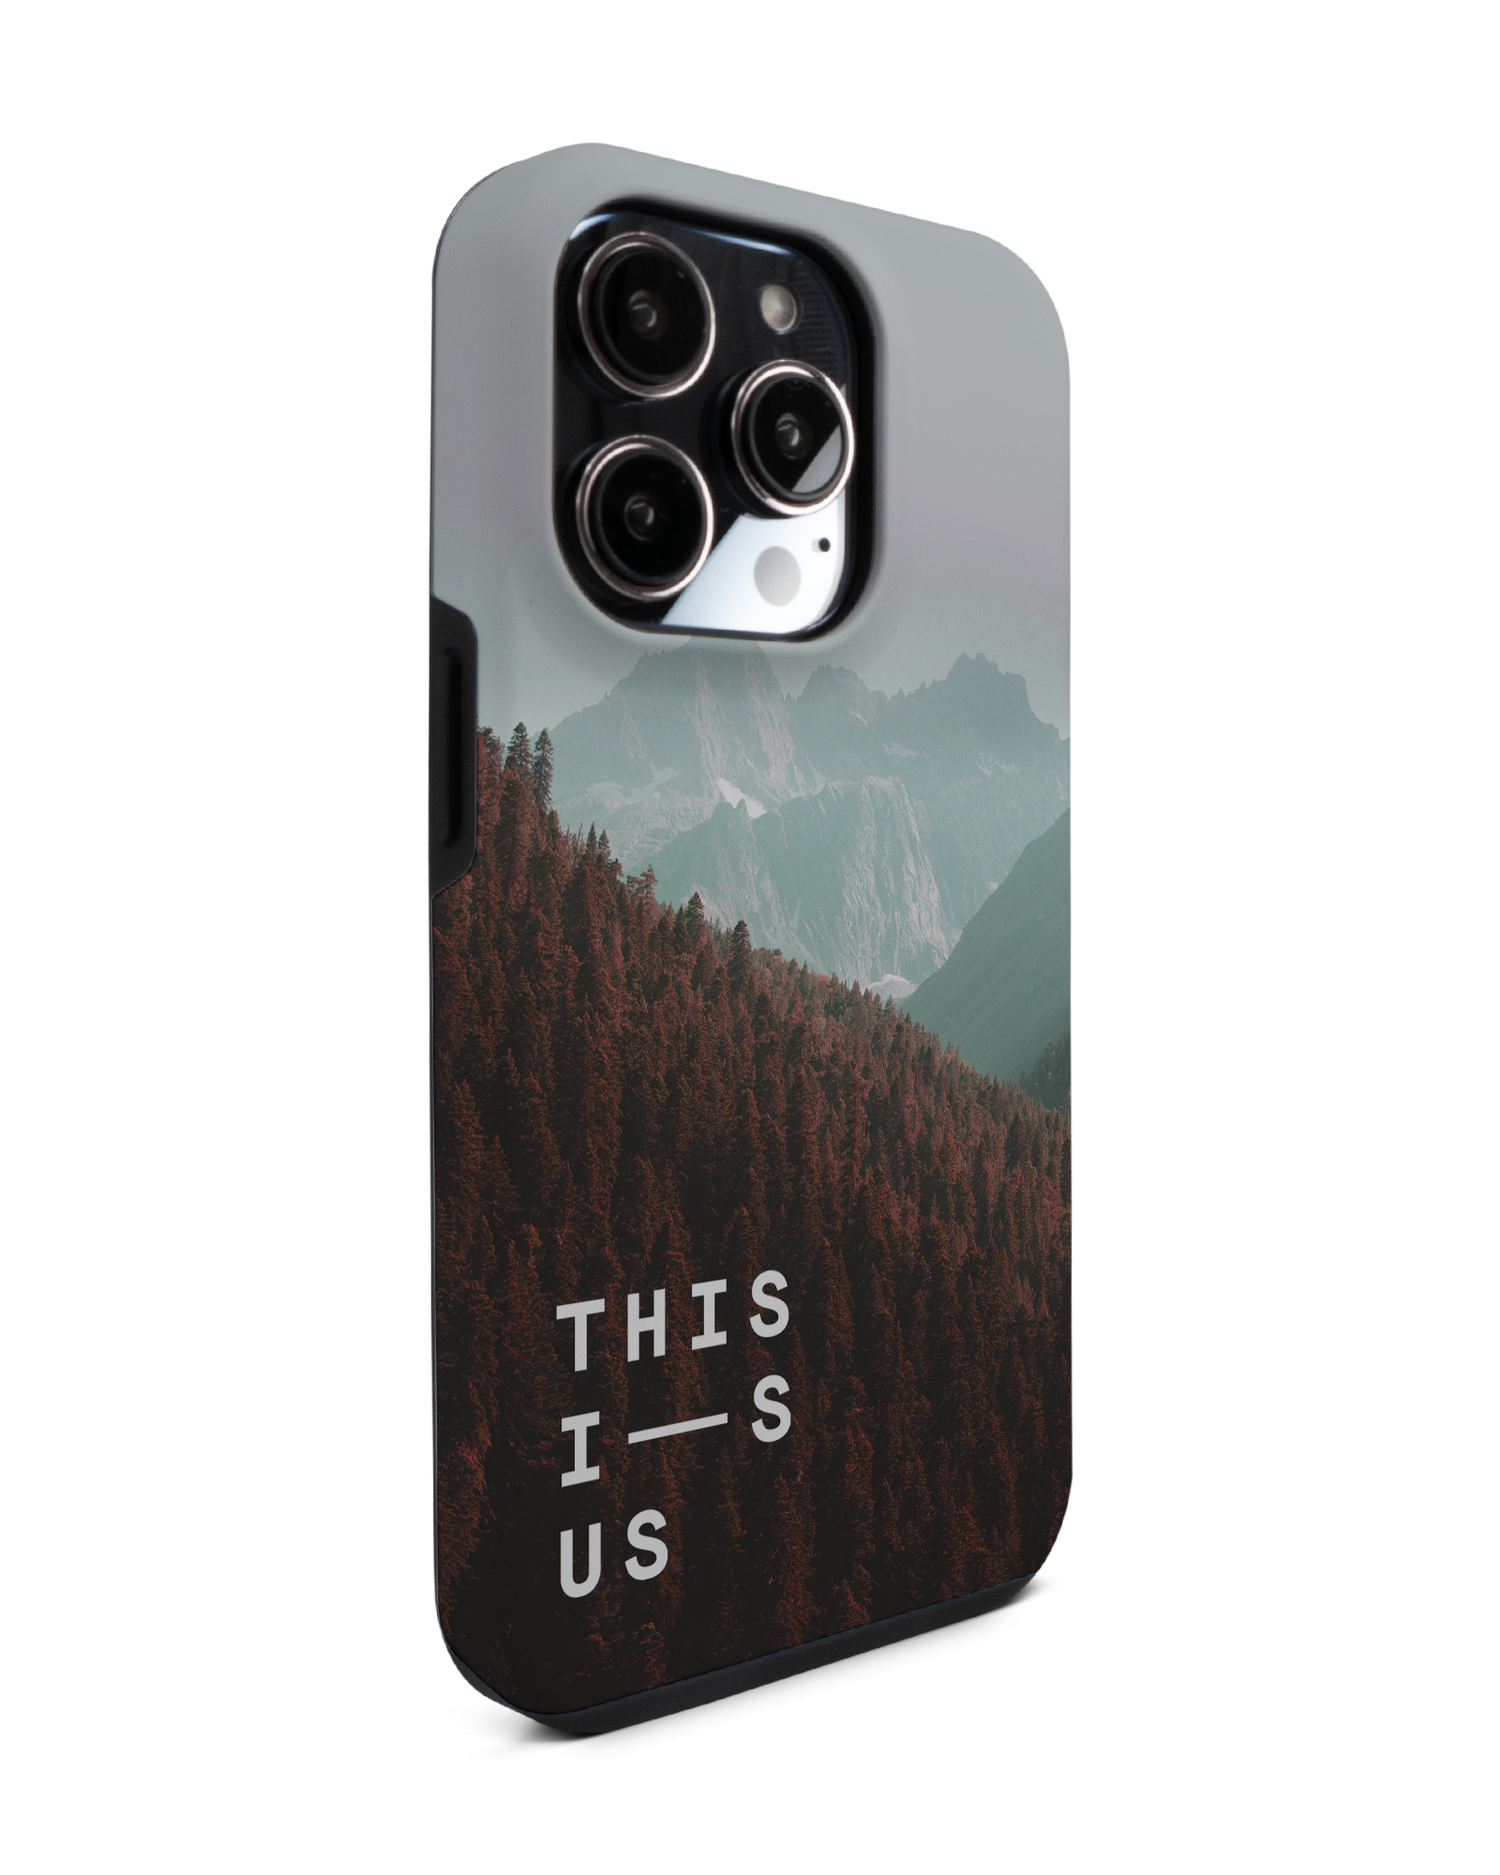 Into the Woods Premium Phone Case for Apple iPhone 14 Pro: View from the left side